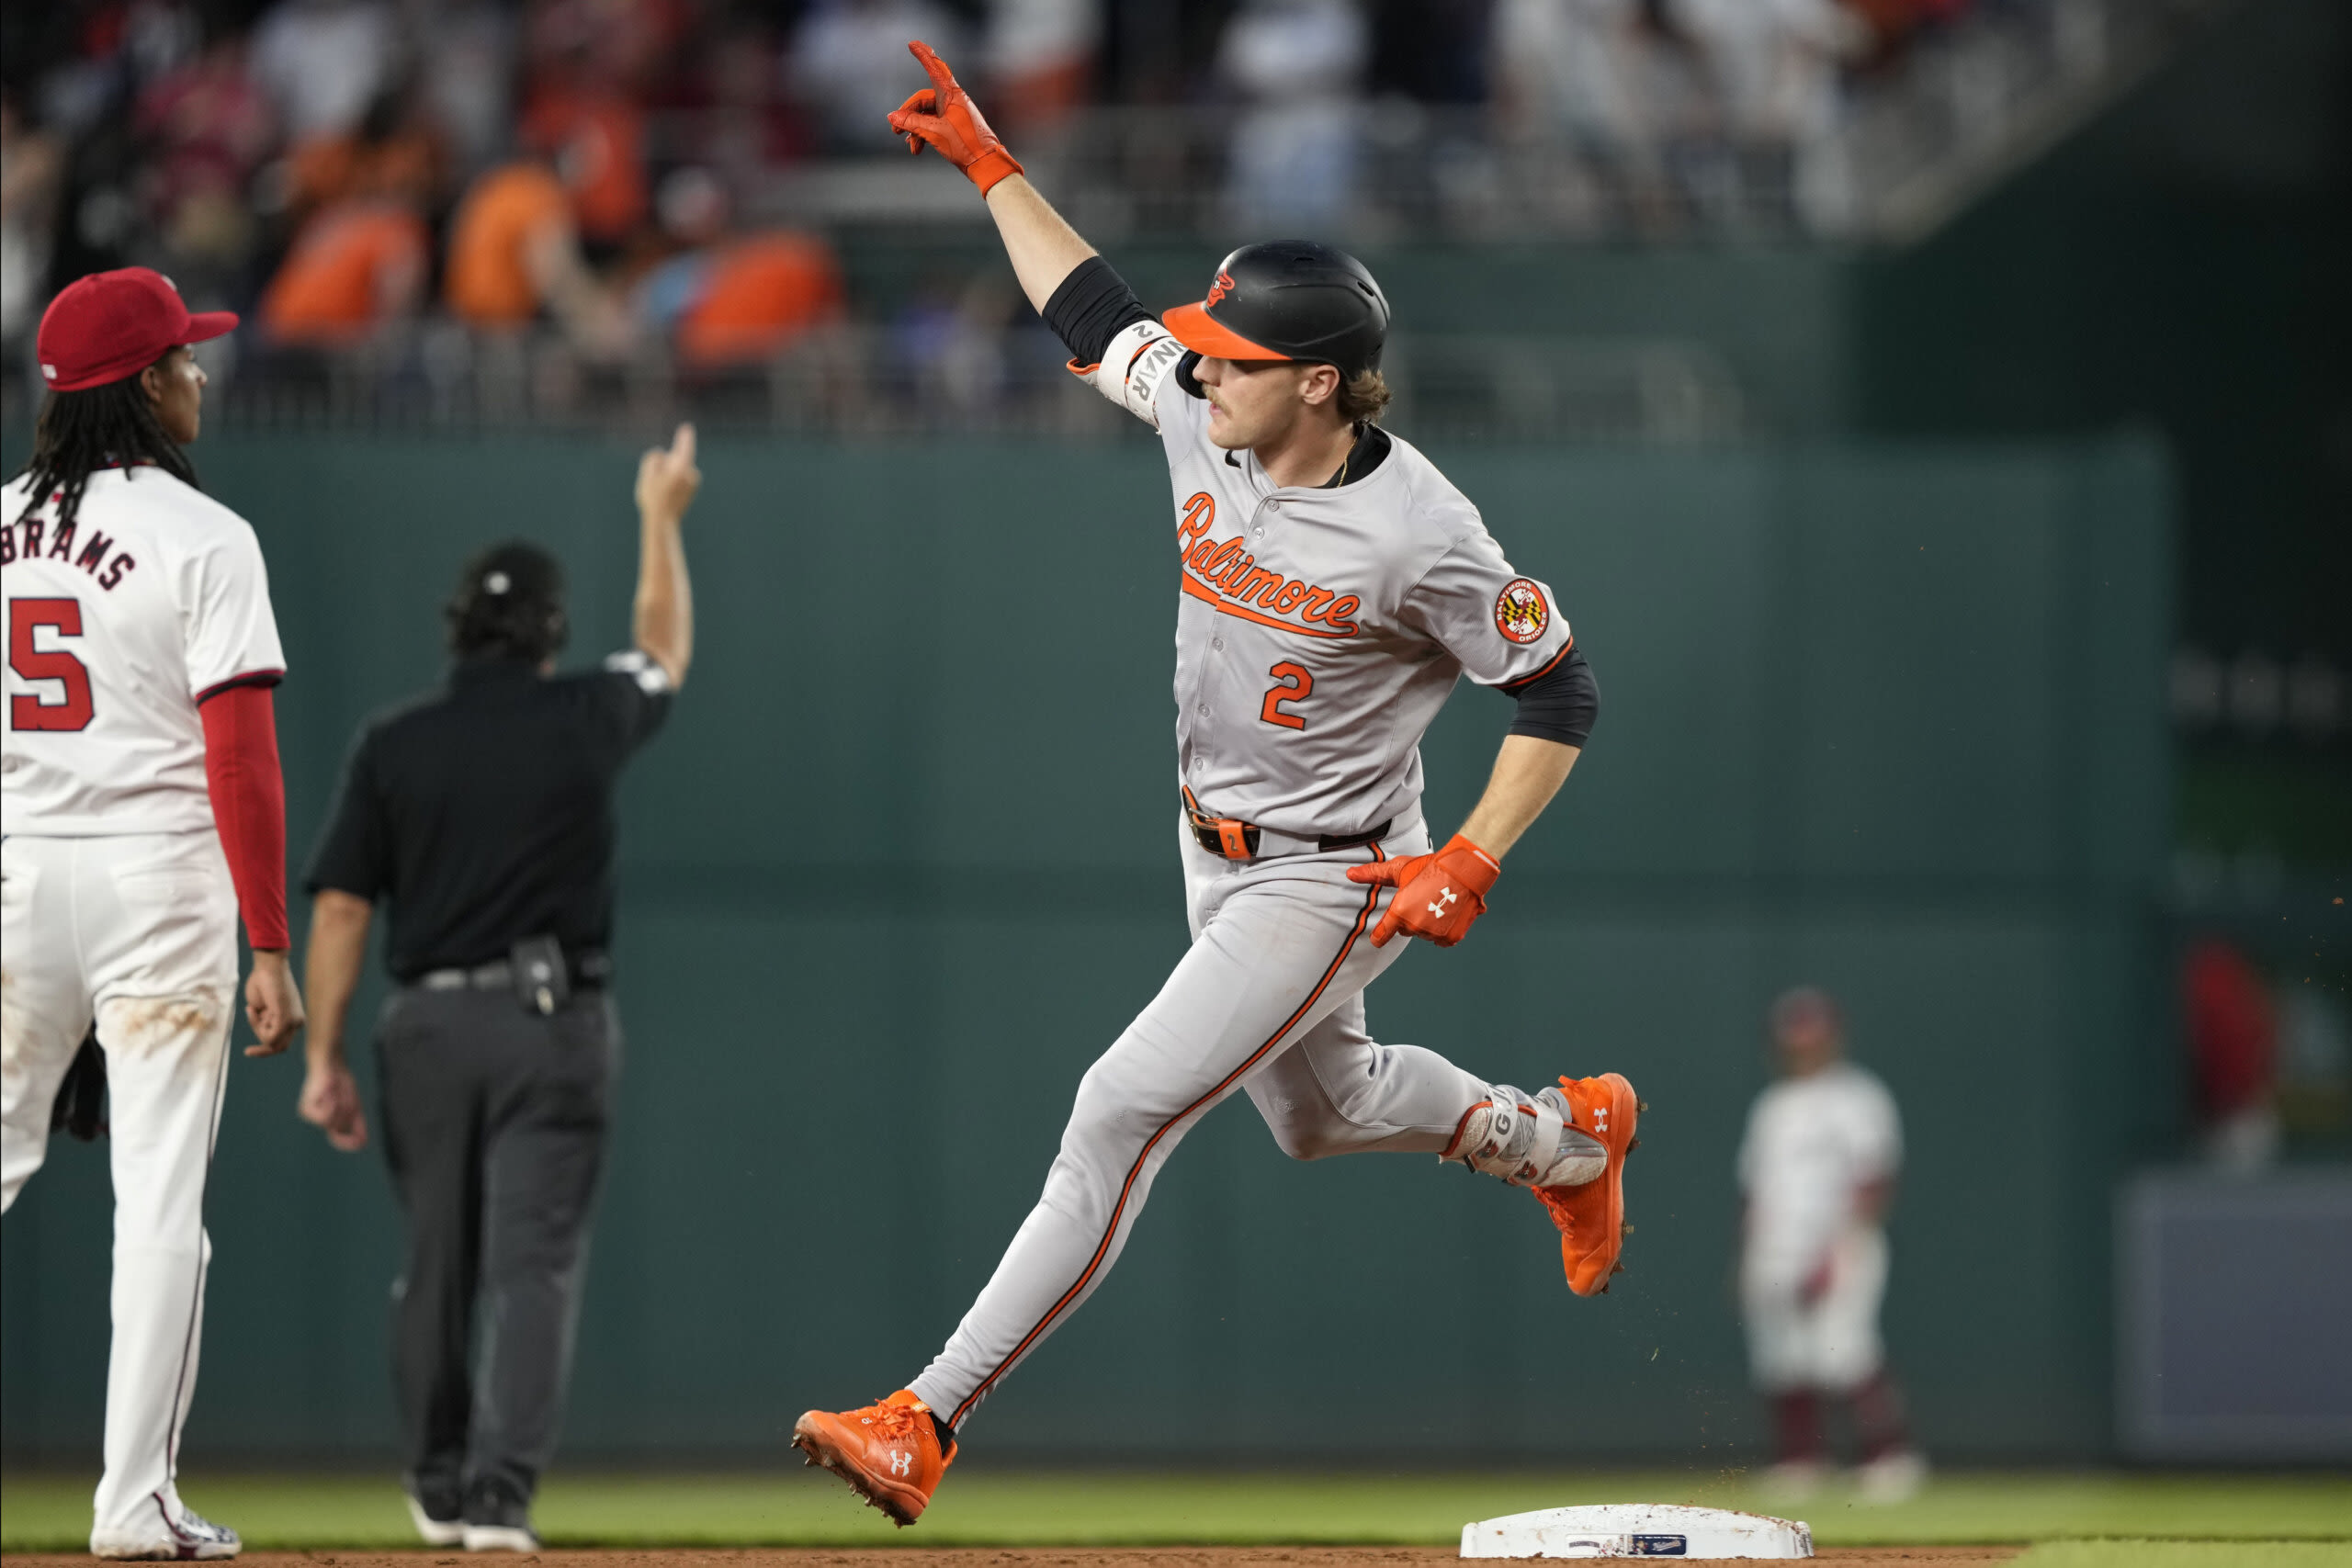 Mateo’s go-ahead hit in 12th helps Orioles survive Kimbrel’s blown save, beat Nats and avoid sweep - WTOP News